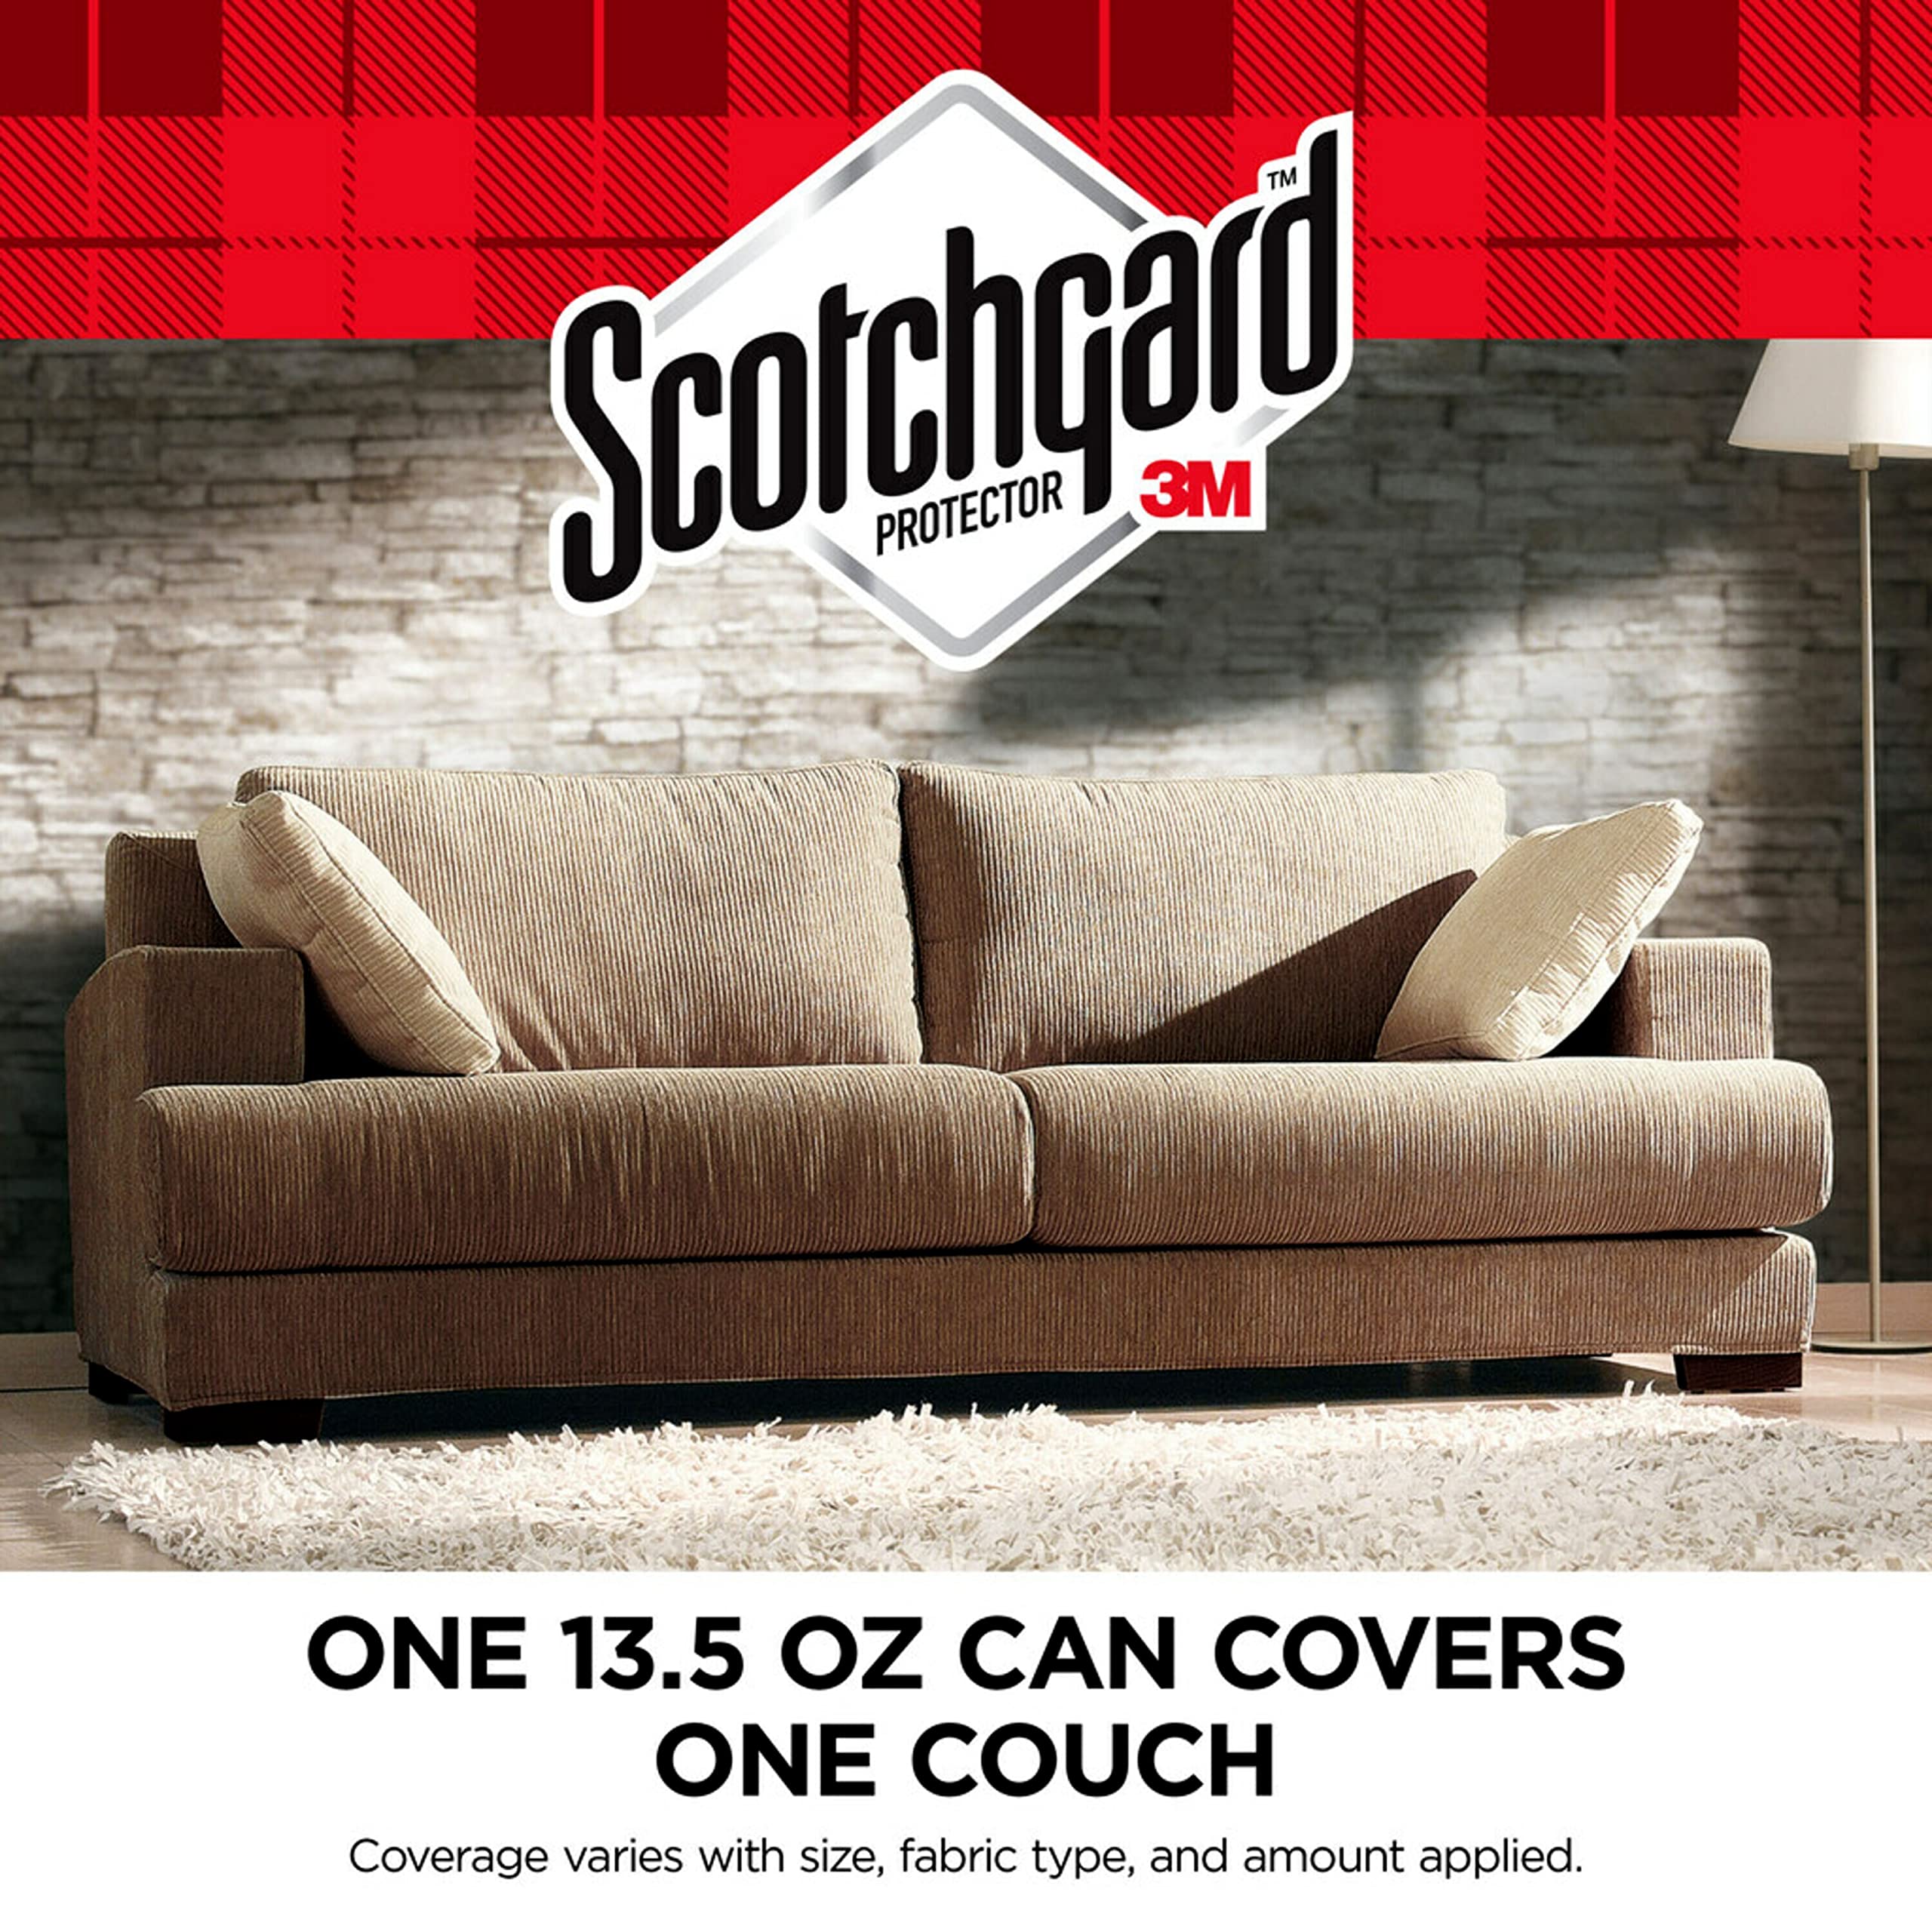 Scotchgard Fabric Water Shield, 60 Ounces (Six, 10 Ounce Cans), Repels Water, Ideal for Couches, Pillows, Furniture, Shoes and More, Long Lasting Protection